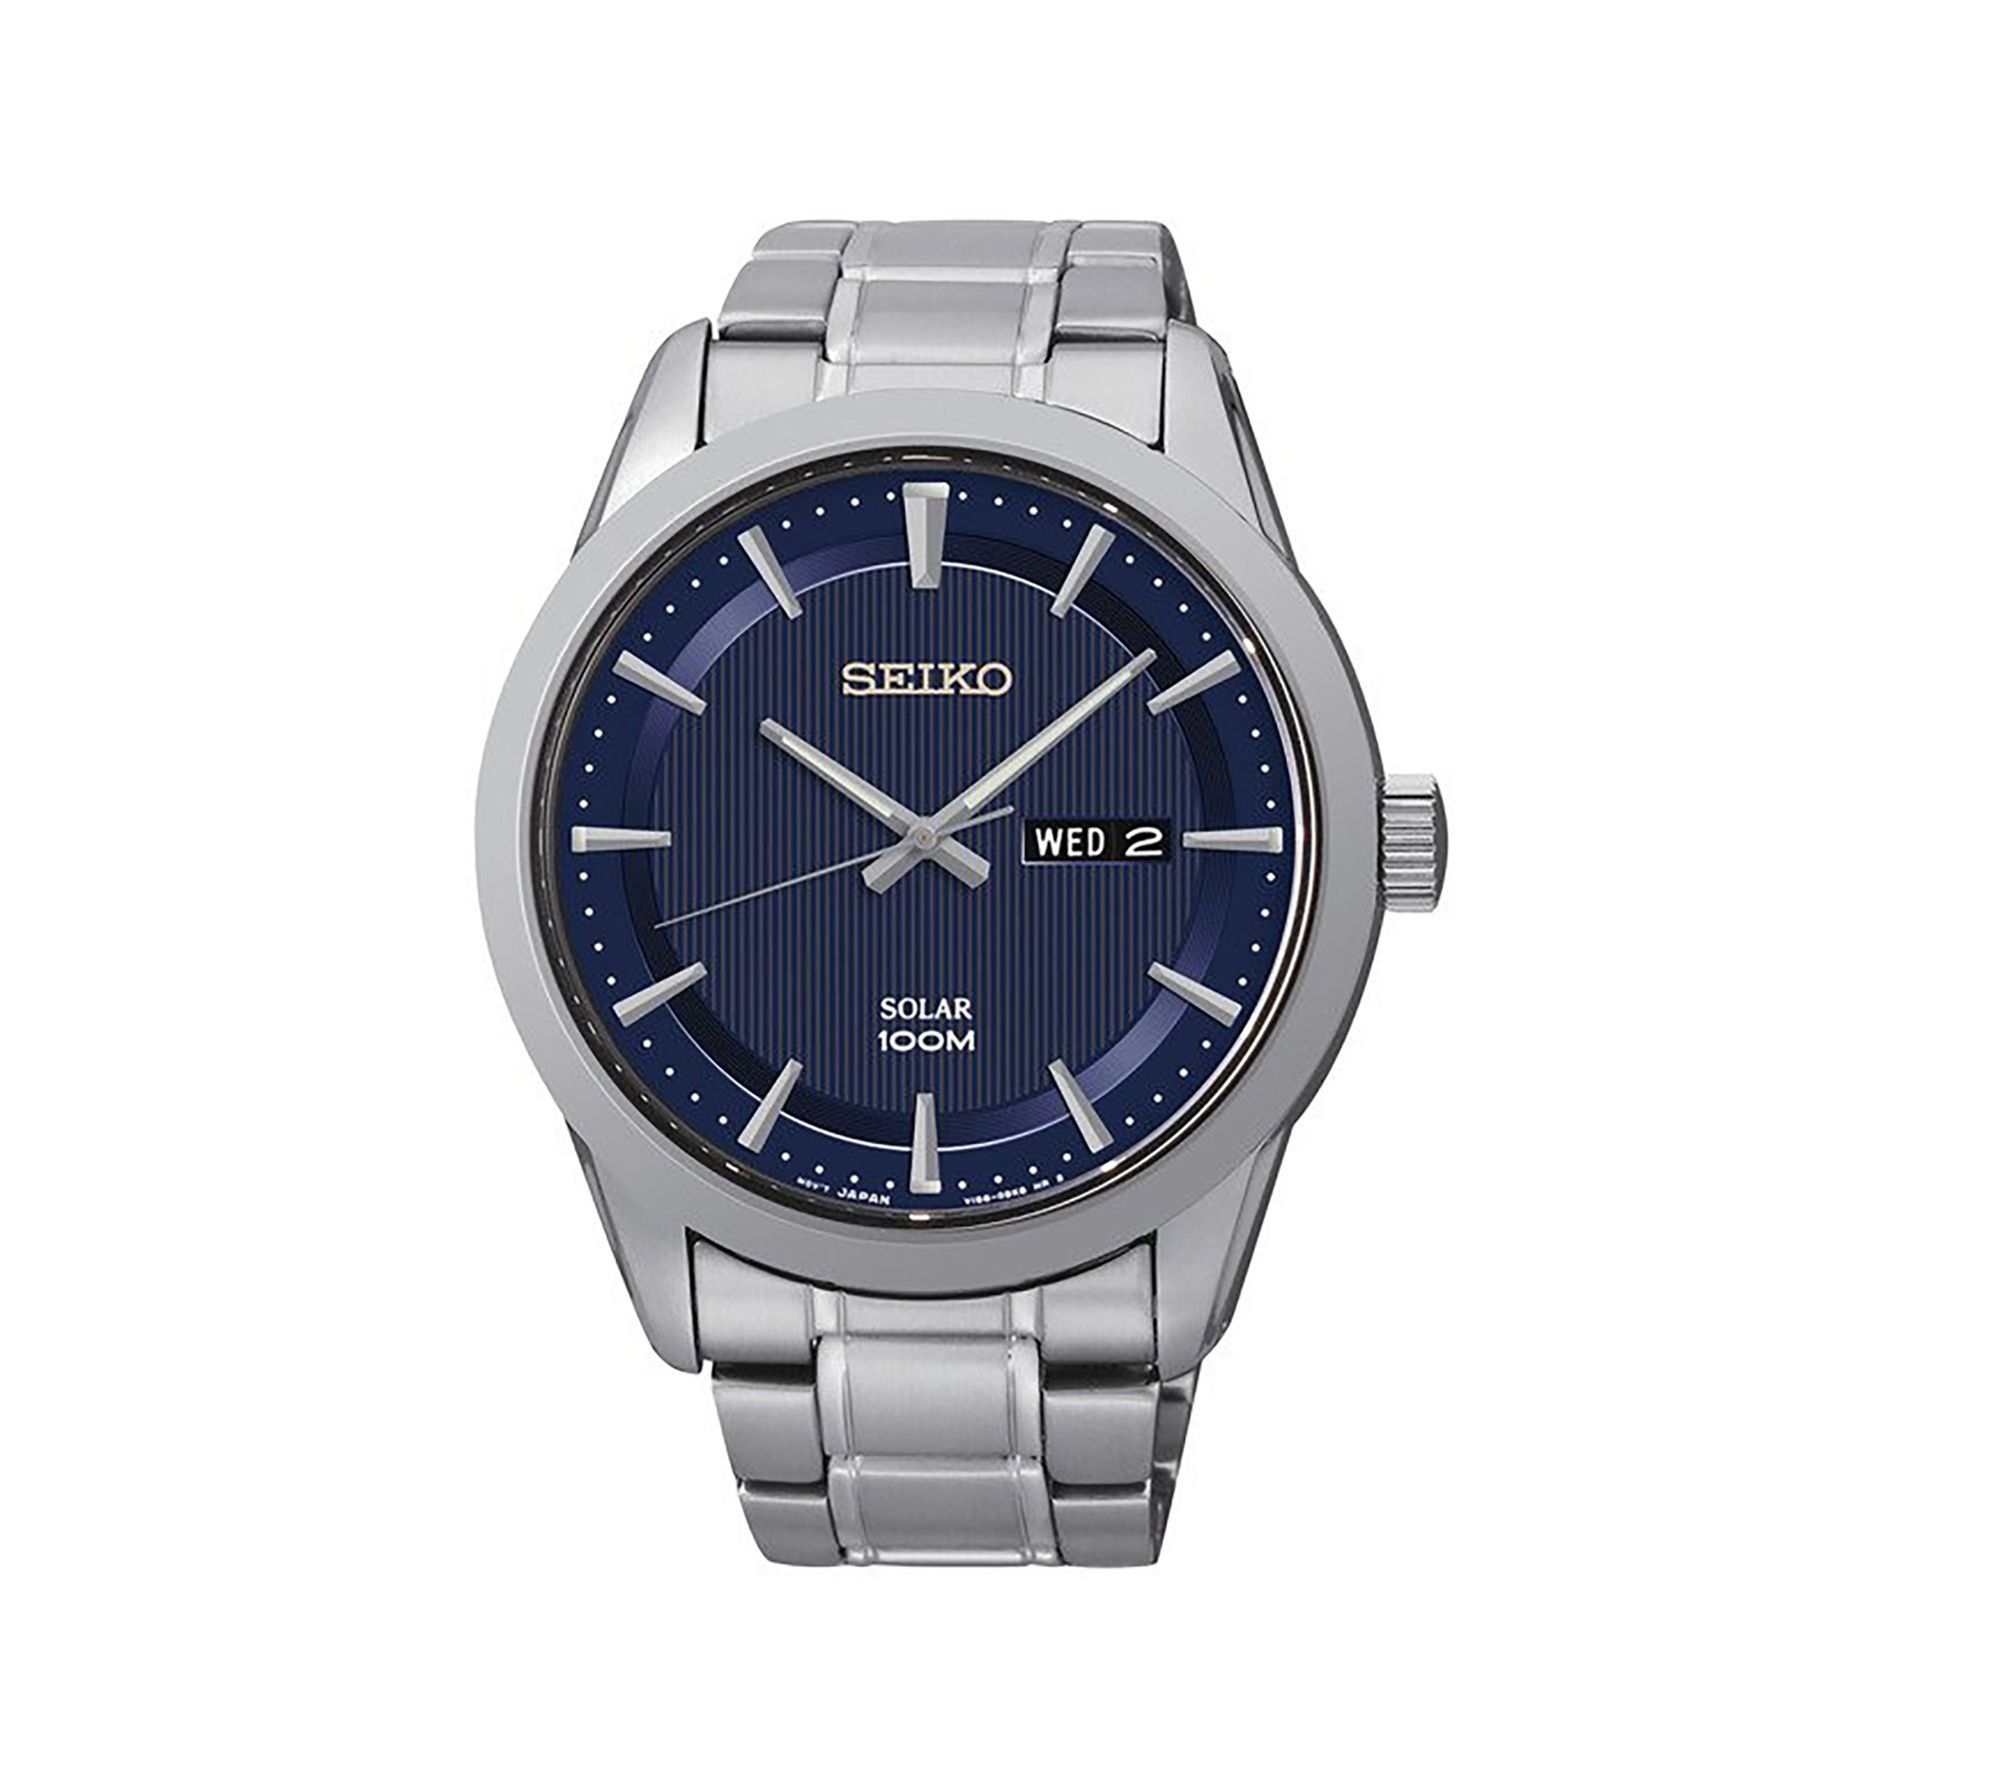 Seiko Men's Blue Dial Stainless Watch w/ Date - QVC.com